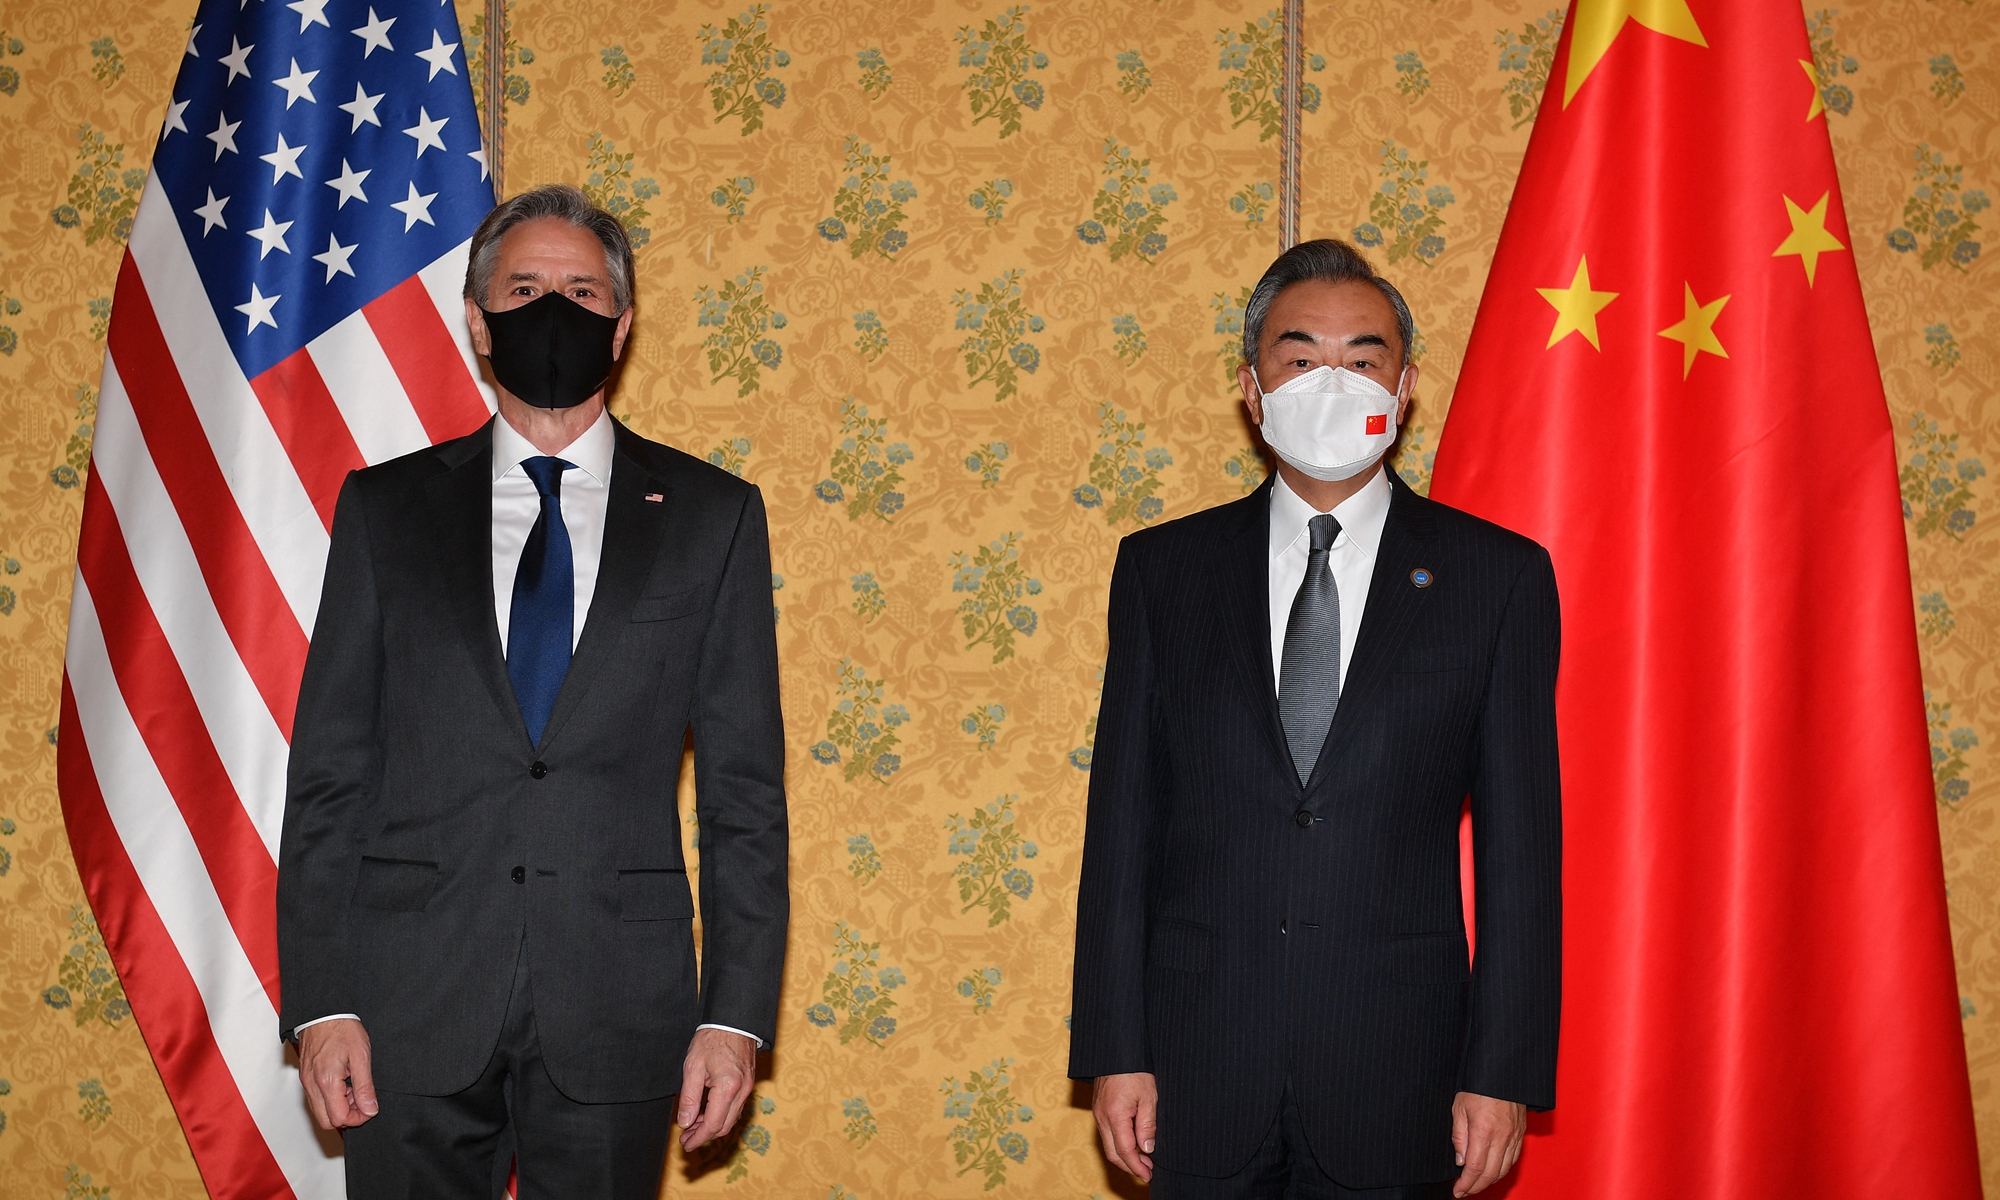 Chinese State Councilor and Foreign Minister Wang Yi (right) and US Secretary of State Antony Blinken pose for photo prior to their meeting on October 31, 2021 at a hotel in Rome on the sidelines of the G20 of World Leaders Summit of Rome. Photo: AFP